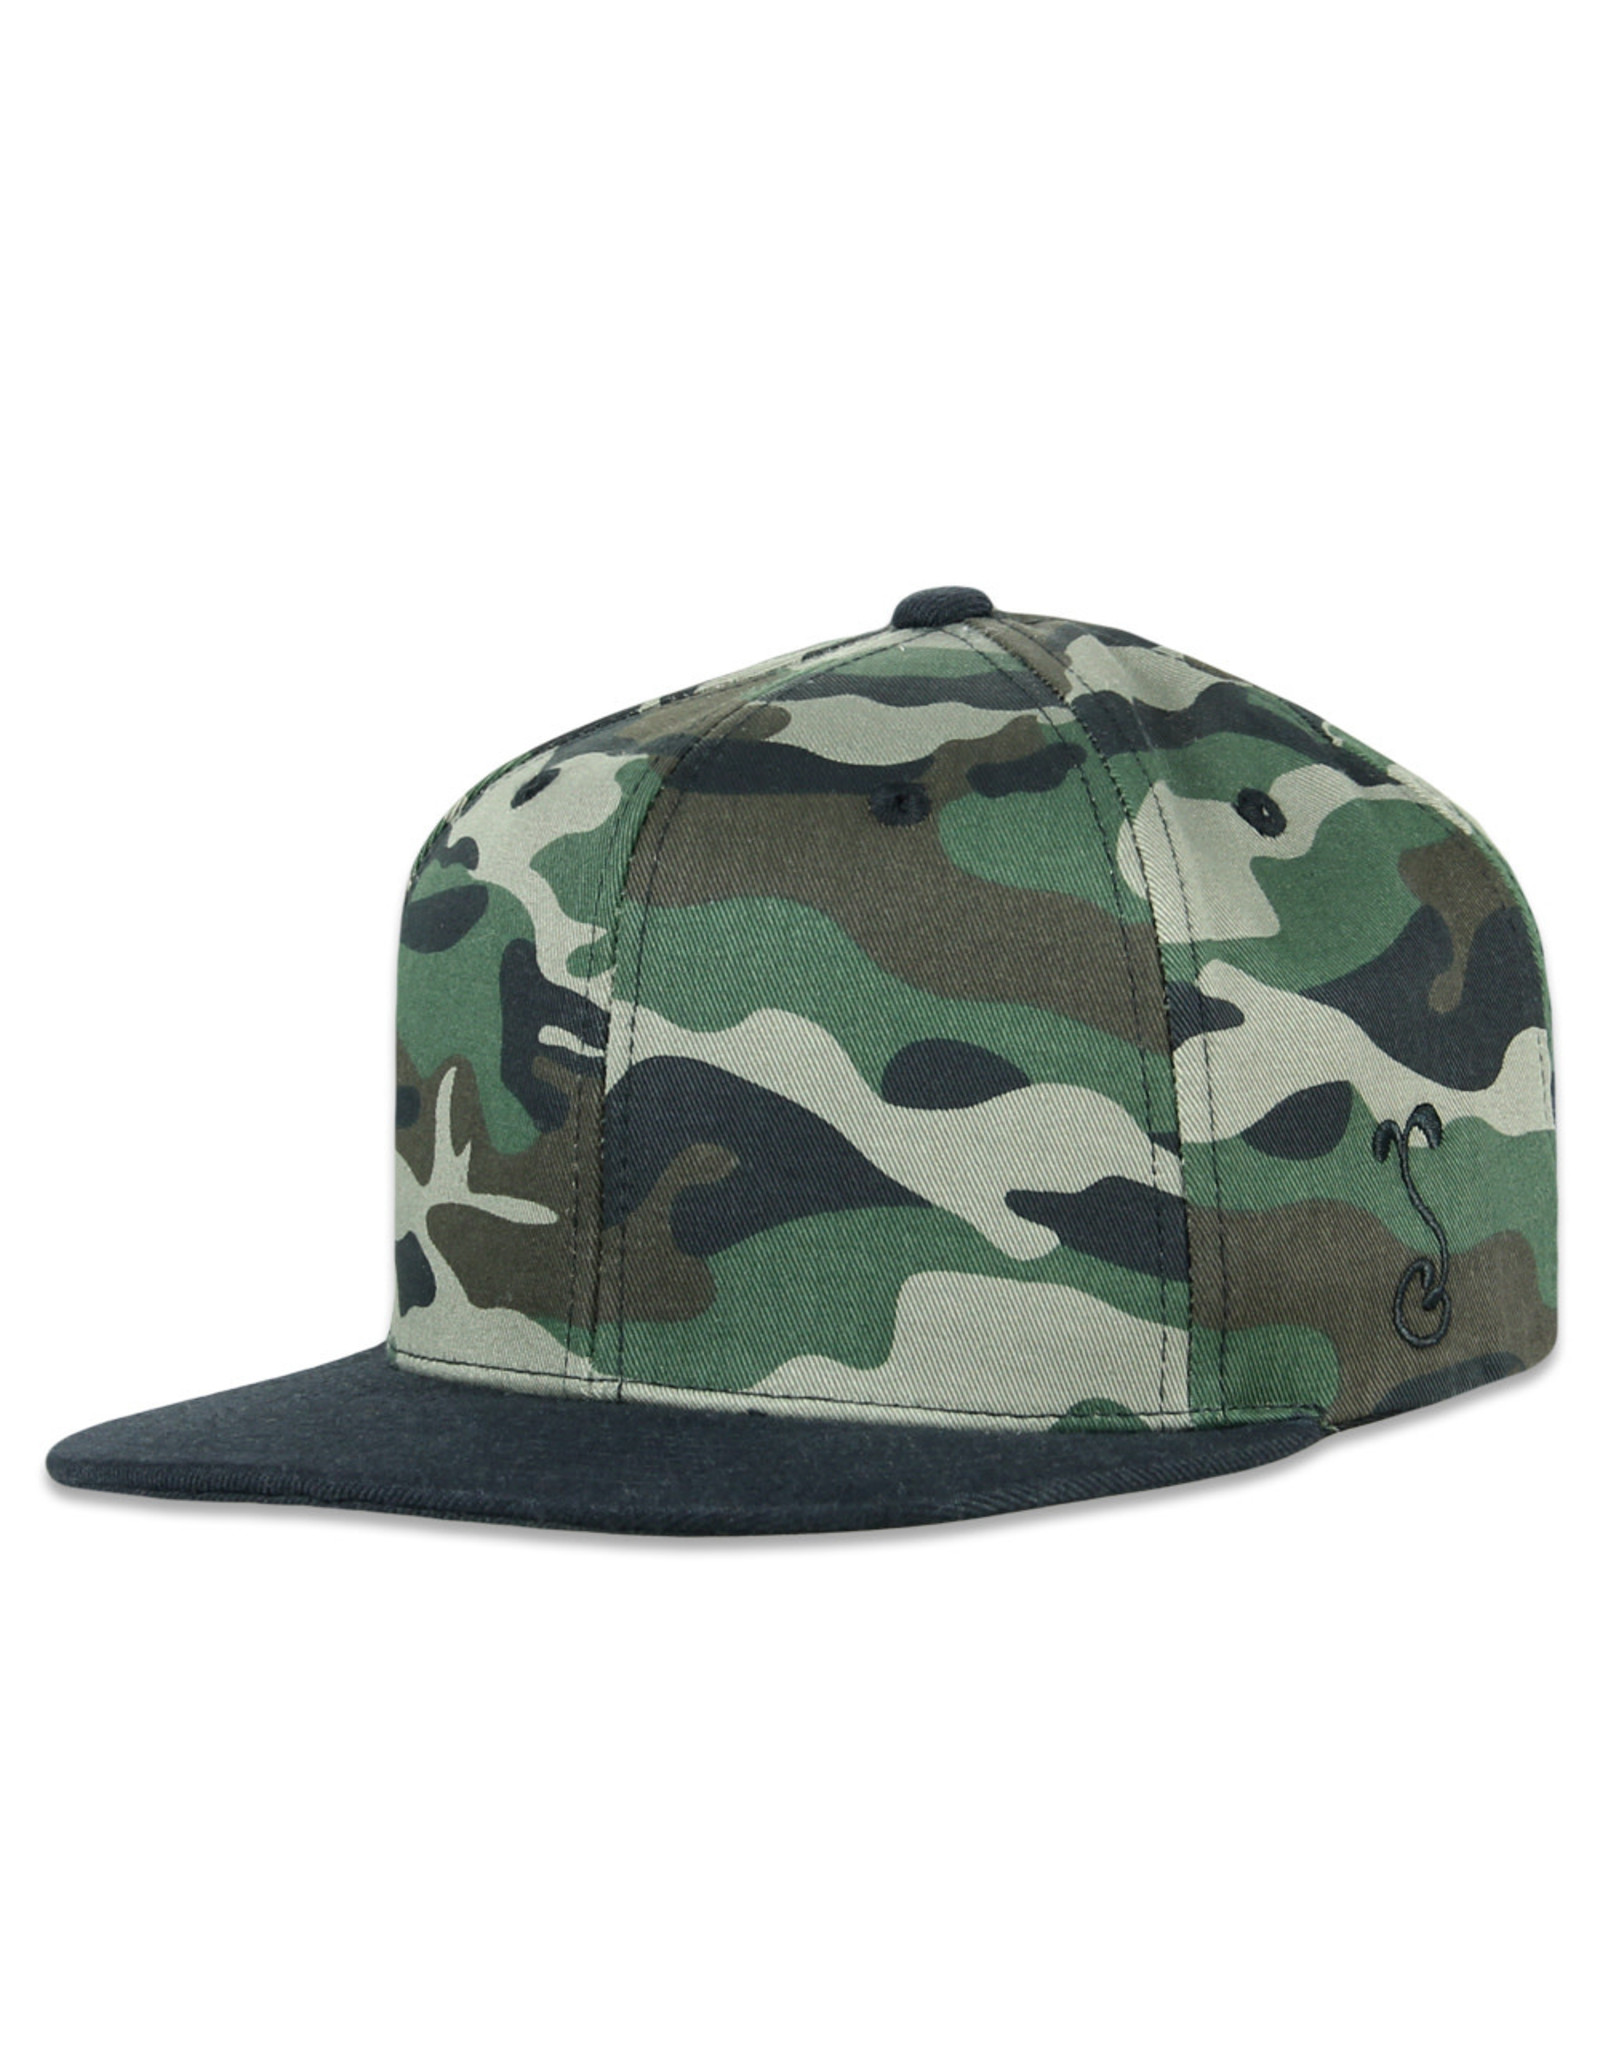 Touch Of Class Camo Pro Fit Snapback Hat L/XL